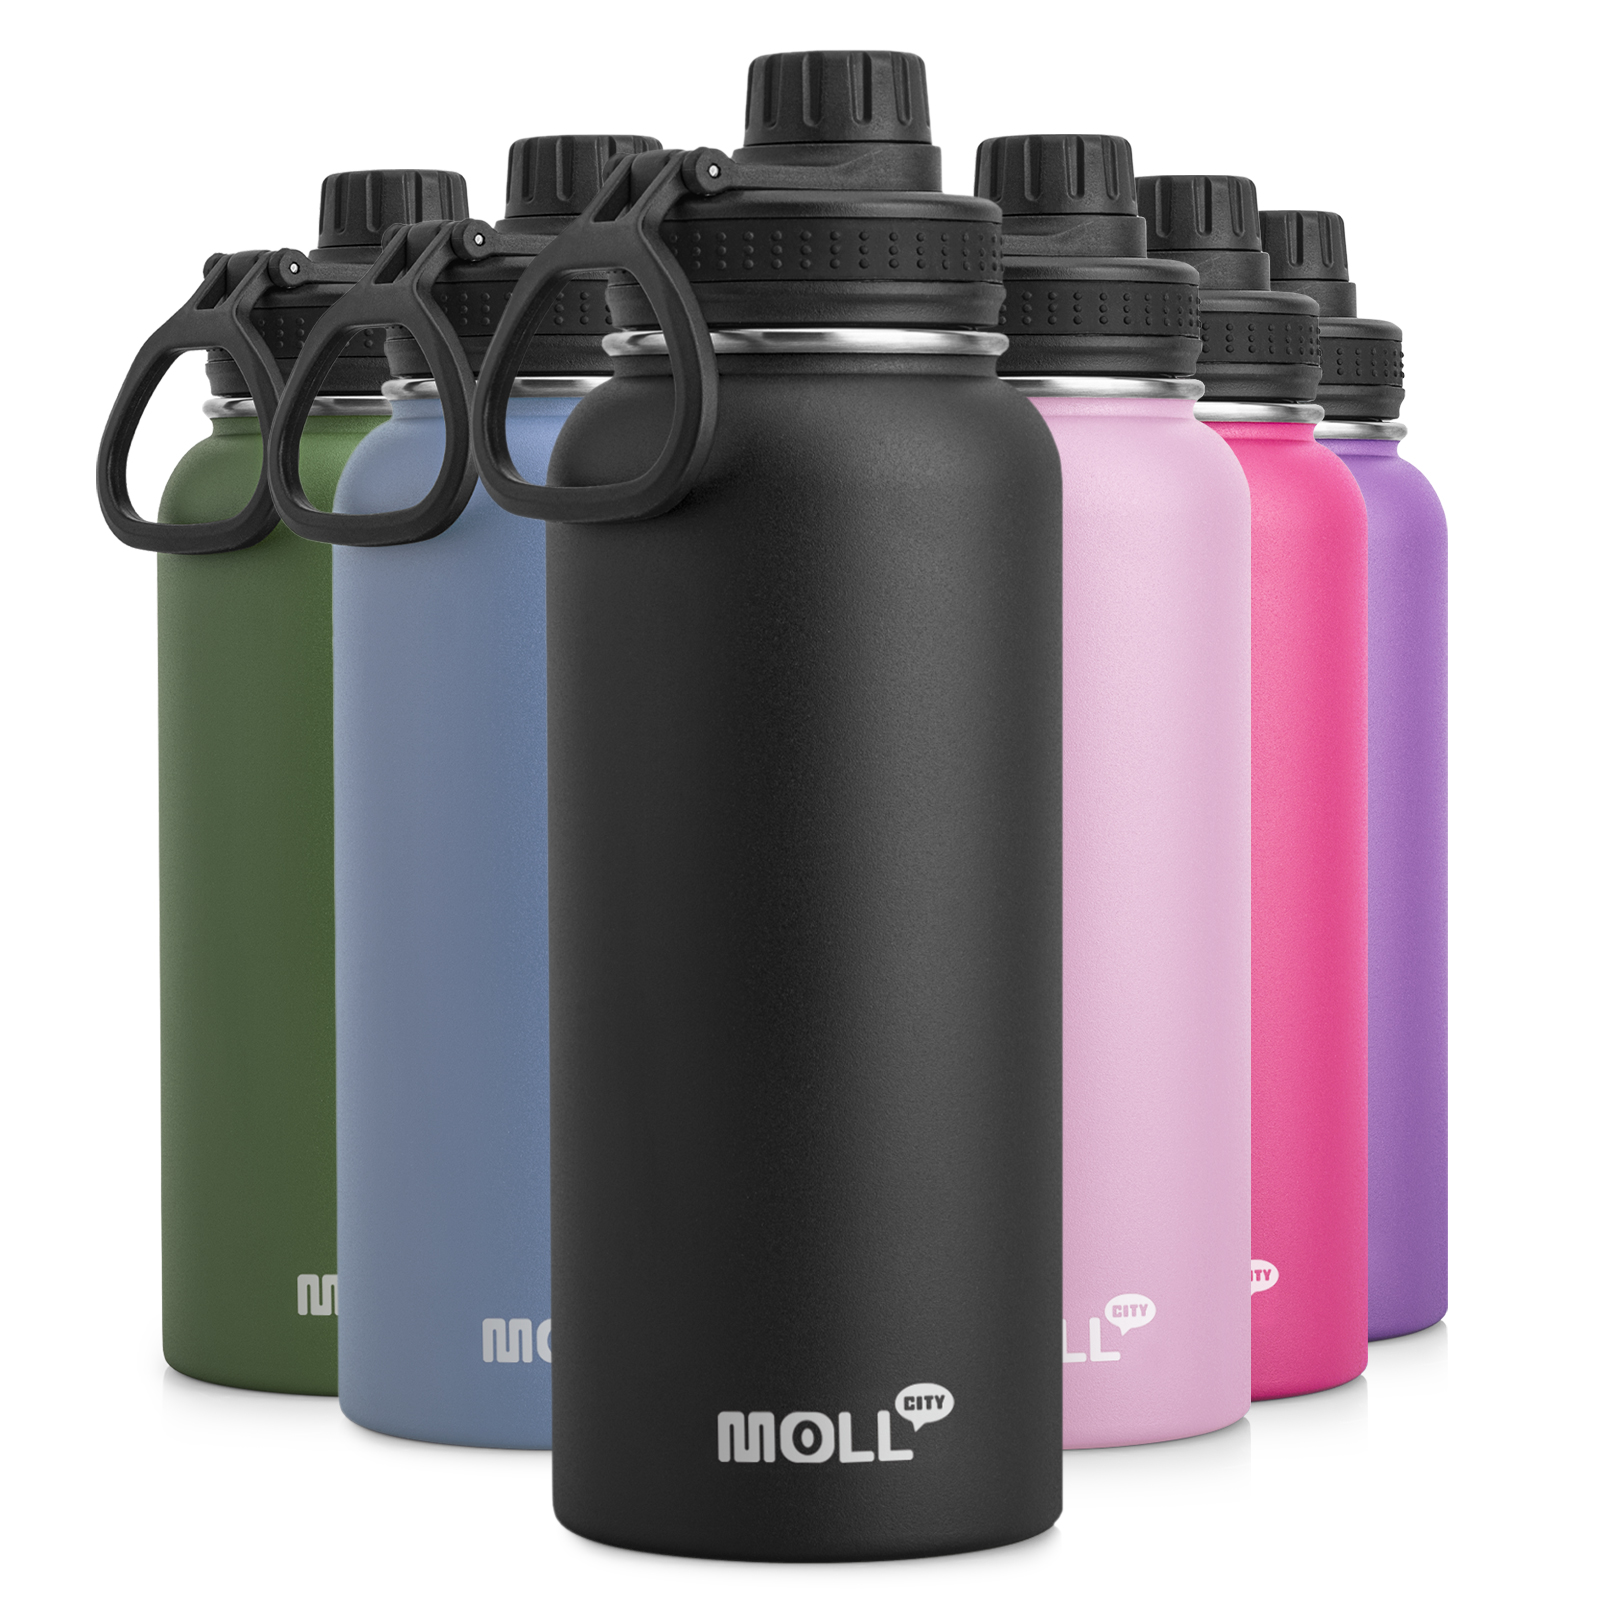 LIYONG 3600Ml Stainless Steel Thermos